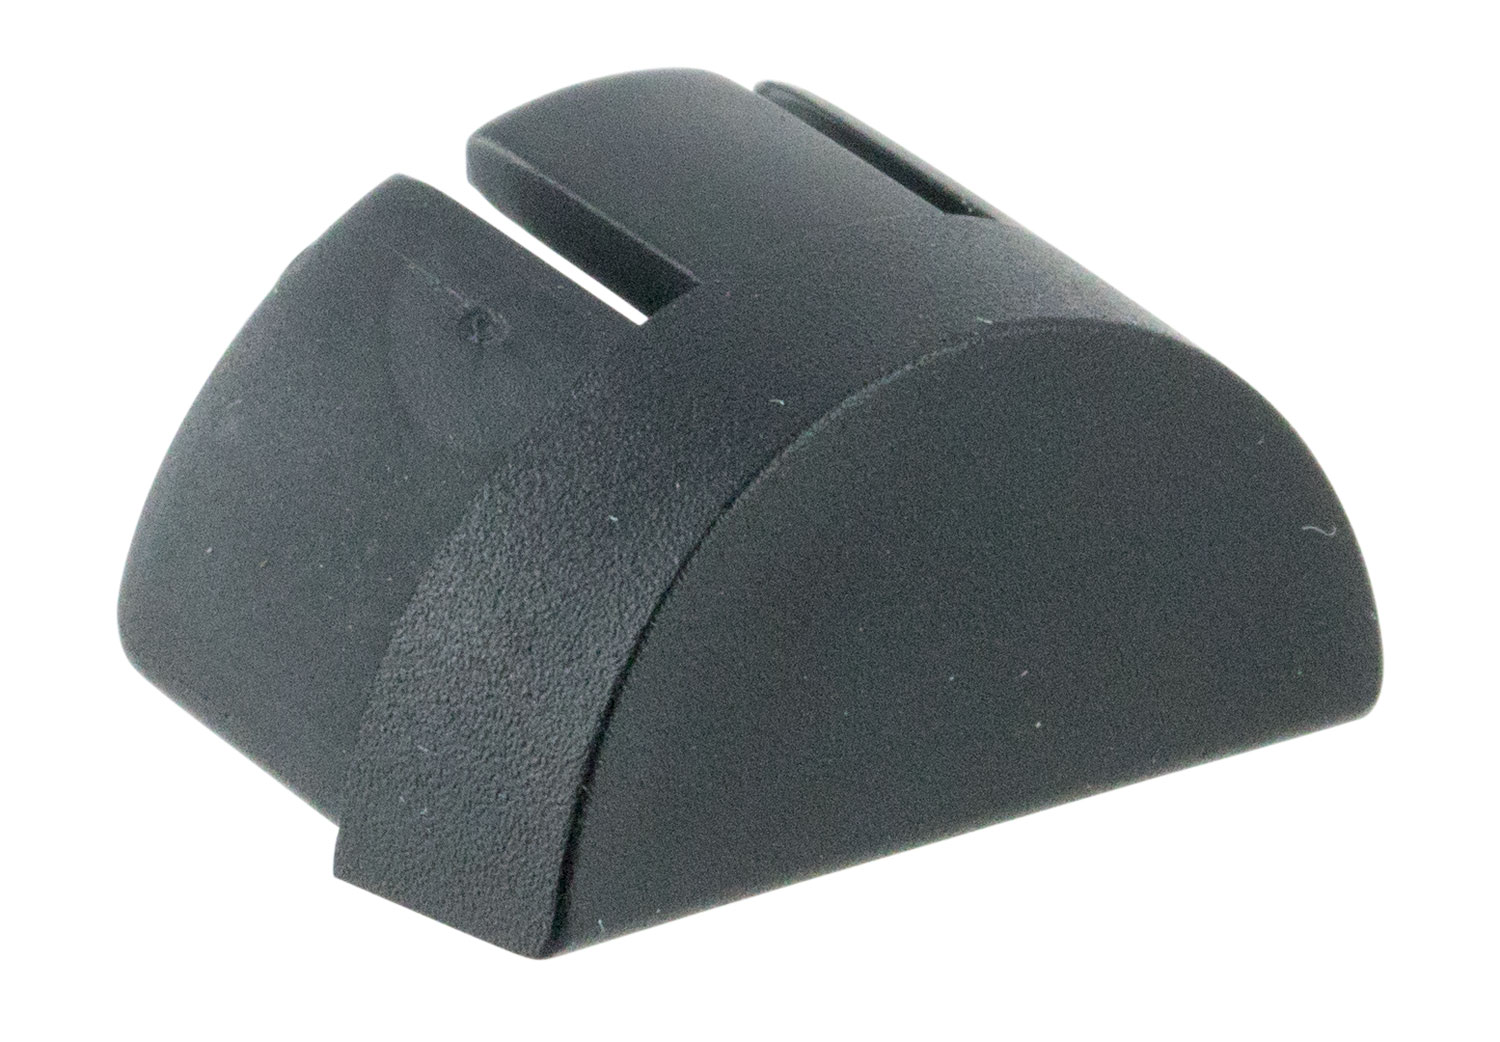 PEARCE GRIP FRAME INSERT FOR GLOCK SUB-COMPACT